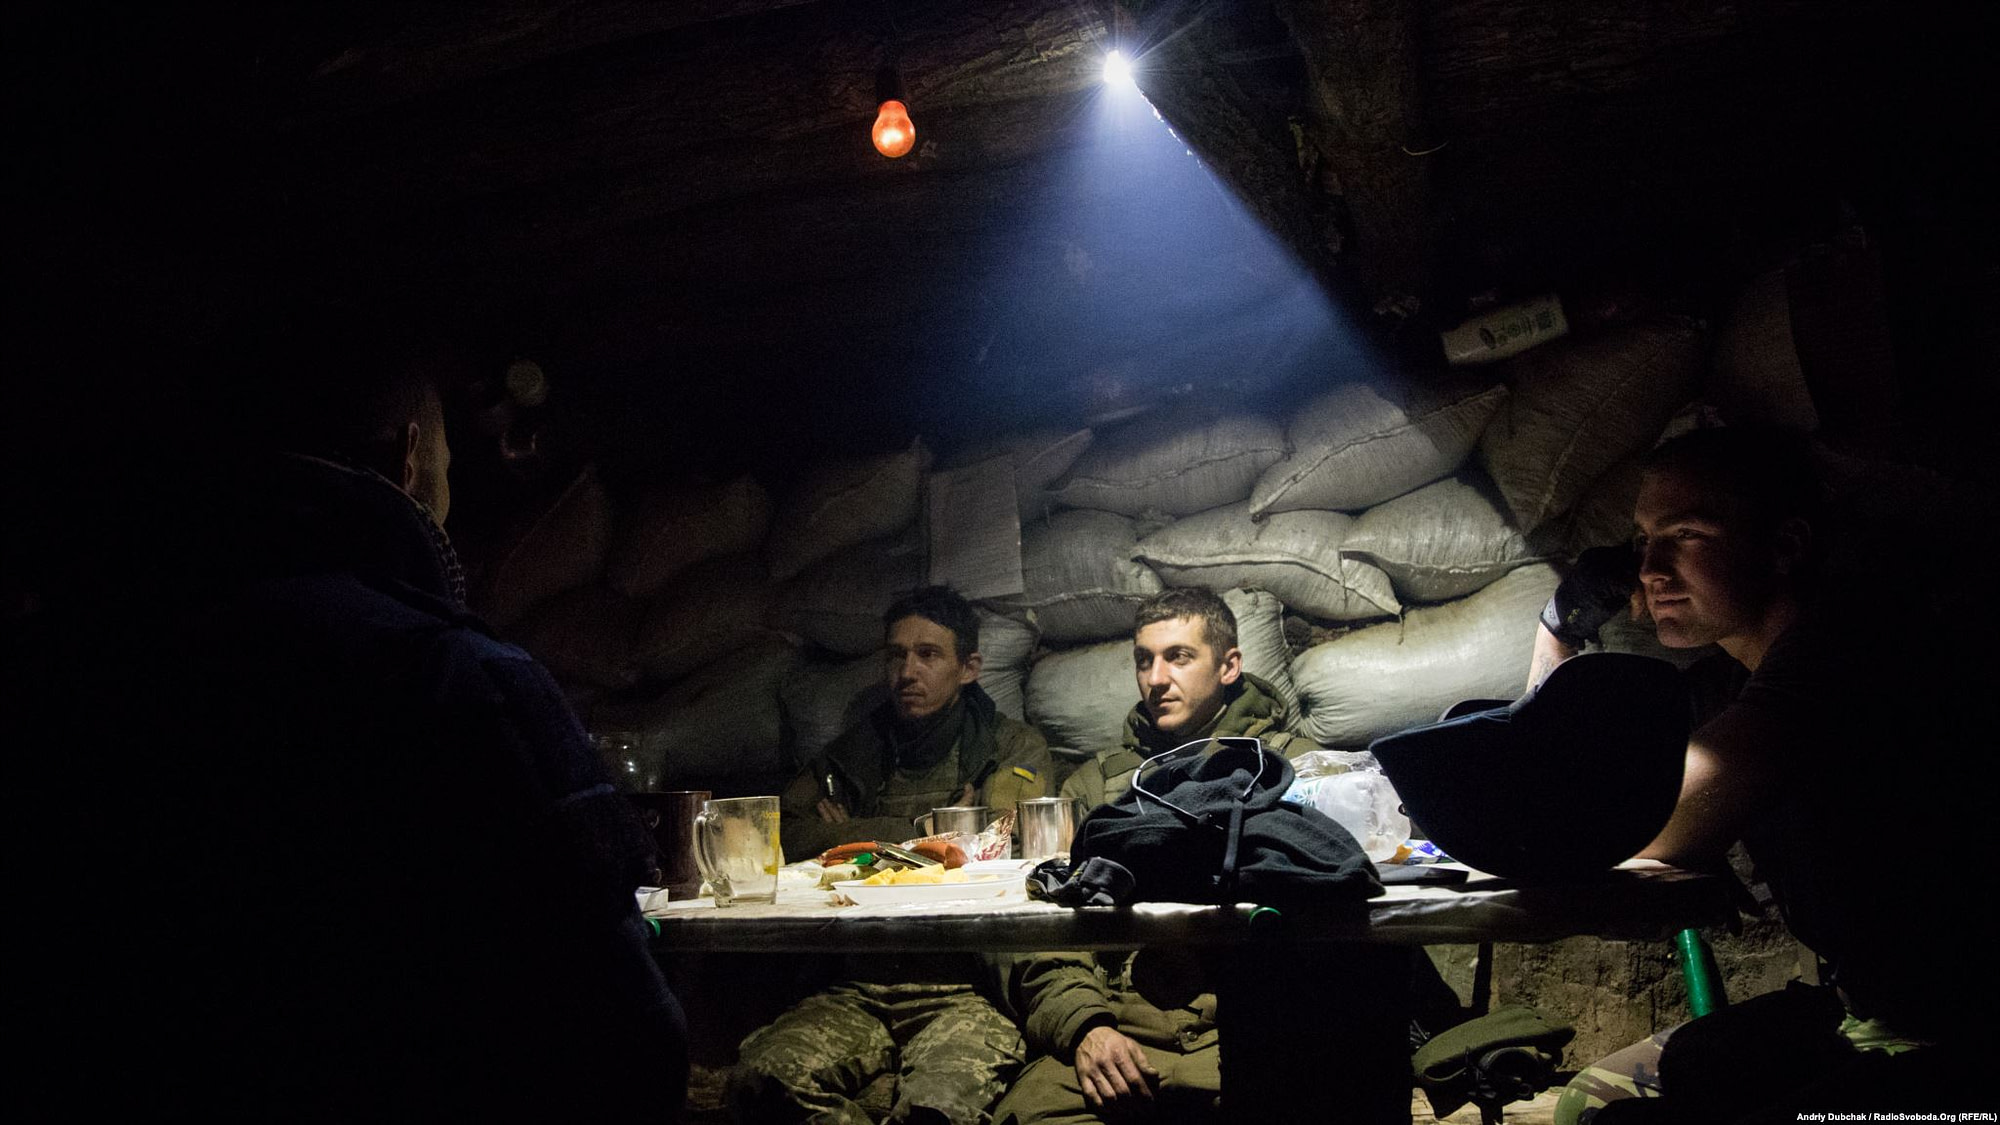 Dinner in the middle of fighting. Men drink tea and rest in a kitchen-dugout, while other soldiers were suppressing enemy fire. (photo by ukrainian military photographer Andriy Dubchak)